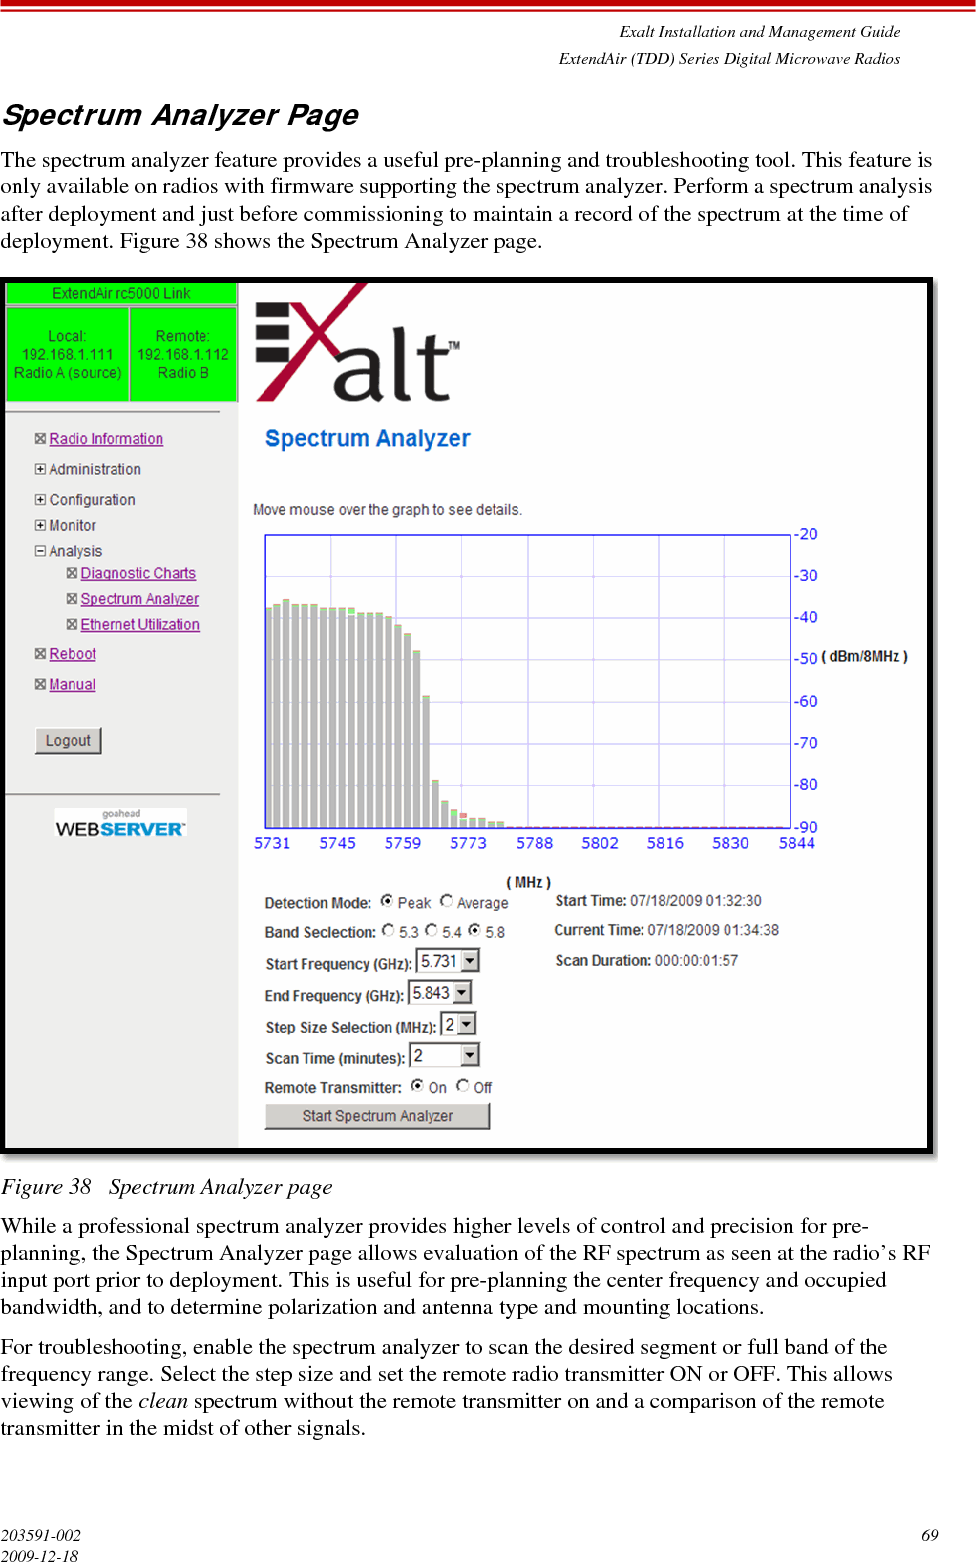 Exalt Installation and Management GuideExtendAir (TDD) Series Digital Microwave Radios203591-002 692009-12-18Spectrum Analyzer PageThe spectrum analyzer feature provides a useful pre-planning and troubleshooting tool. This feature is only available on radios with firmware supporting the spectrum analyzer. Perform a spectrum analysis after deployment and just before commissioning to maintain a record of the spectrum at the time of deployment. Figure 38 shows the Spectrum Analyzer page.Figure 38   Spectrum Analyzer pageWhile a professional spectrum analyzer provides higher levels of control and precision for pre-planning, the Spectrum Analyzer page allows evaluation of the RF spectrum as seen at the radio’s RF input port prior to deployment. This is useful for pre-planning the center frequency and occupied bandwidth, and to determine polarization and antenna type and mounting locations. For troubleshooting, enable the spectrum analyzer to scan the desired segment or full band of the frequency range. Select the step size and set the remote radio transmitter ON or OFF. This allows viewing of the clean spectrum without the remote transmitter on and a comparison of the remote transmitter in the midst of other signals.